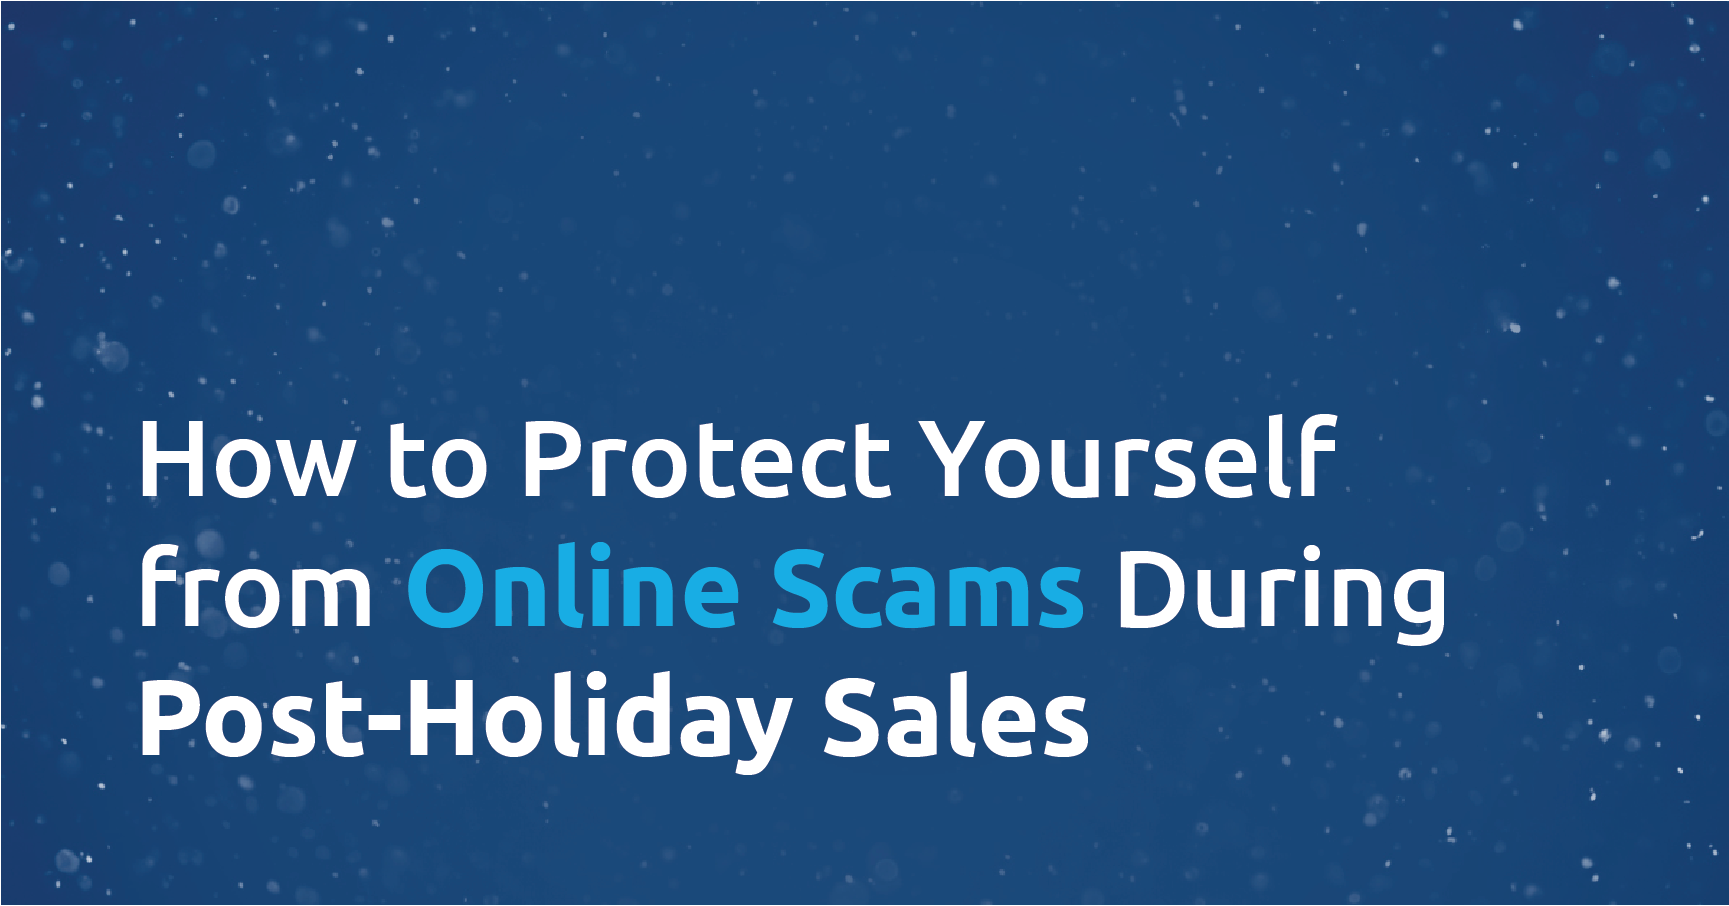 How to Protect Yourself from Online Scams During Post-Holiday Sales